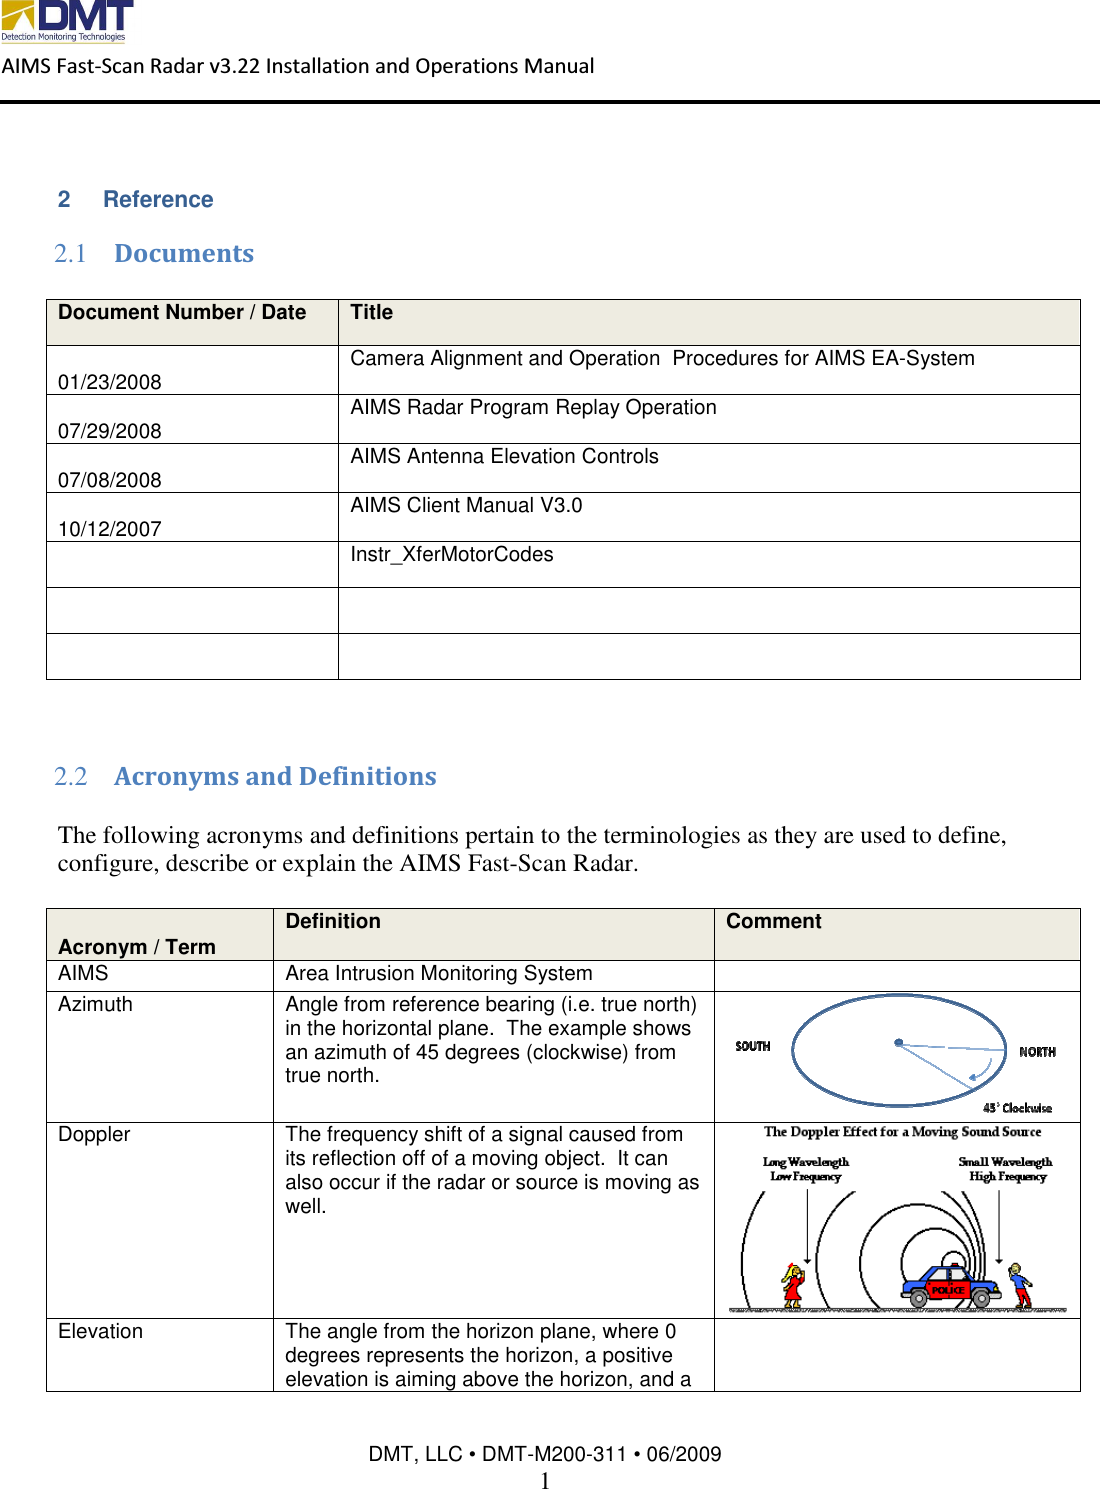  AIMS Fast-Scan Radar v3.22 Installation and Operations Manual    DMT, LLC • DMT-M200-311 • 06/2009 1  2  Reference  2.1 Documents    2.2 Acronyms and Definitions  The following acronyms and definitions pertain to the terminologies as they are used to define, configure, describe or explain the AIMS Fast-Scan Radar.  Document Number / Date Title  01/23/2008  Camera Alignment and Operation  Procedures for AIMS EA-System  07/29/2008  AIMS Radar Program Replay Operation  07/08/2008  AIMS Antenna Elevation Controls  10/12/2007  AIMS Client Manual V3.0   Instr_XferMotorCodes        Acronym / Term Definition Comment AIMS  Area Intrusion Monitoring System   Azimuth  Angle from reference bearing (i.e. true north) in the horizontal plane.  The example shows an azimuth of 45 degrees (clockwise) from true north.  Doppler  The frequency shift of a signal caused from its reflection off of a moving object.  It can also occur if the radar or source is moving as well.   Elevation  The angle from the horizon plane, where 0 degrees represents the horizon, a positive elevation is aiming above the horizon, and a  